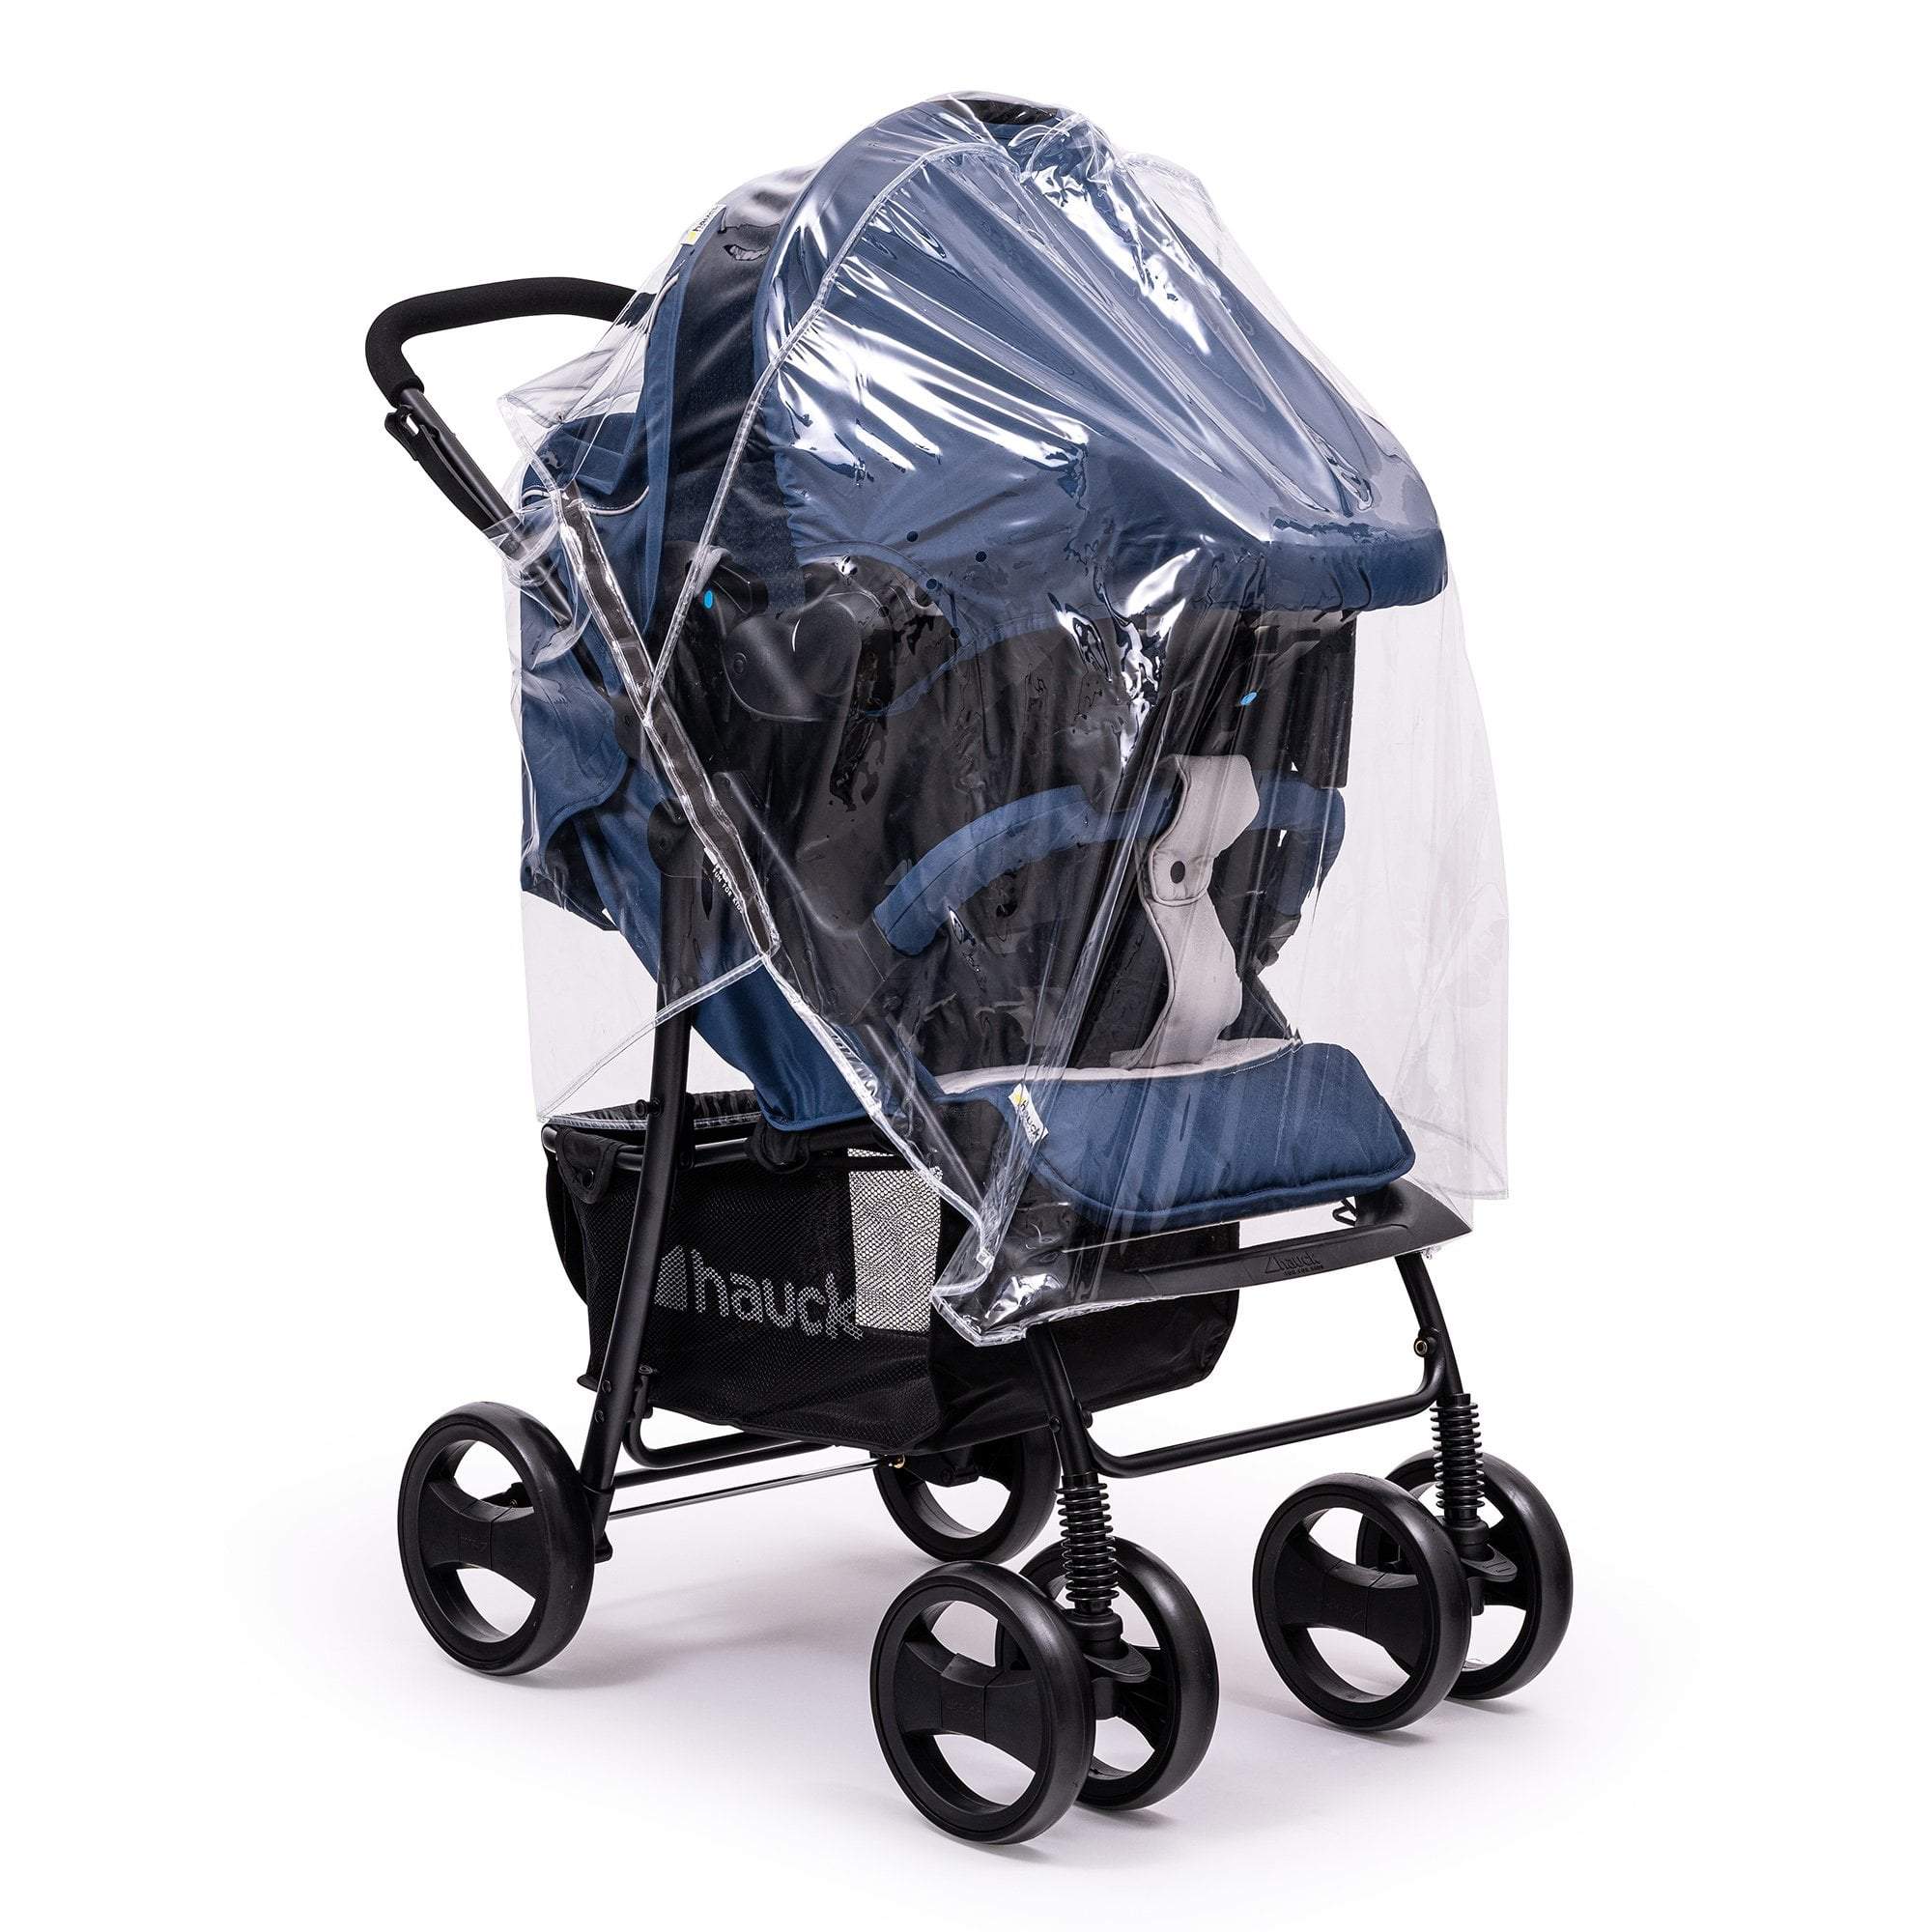 Travel System Raincover Compatible with Recaro - Fits All Models - For Your Little One